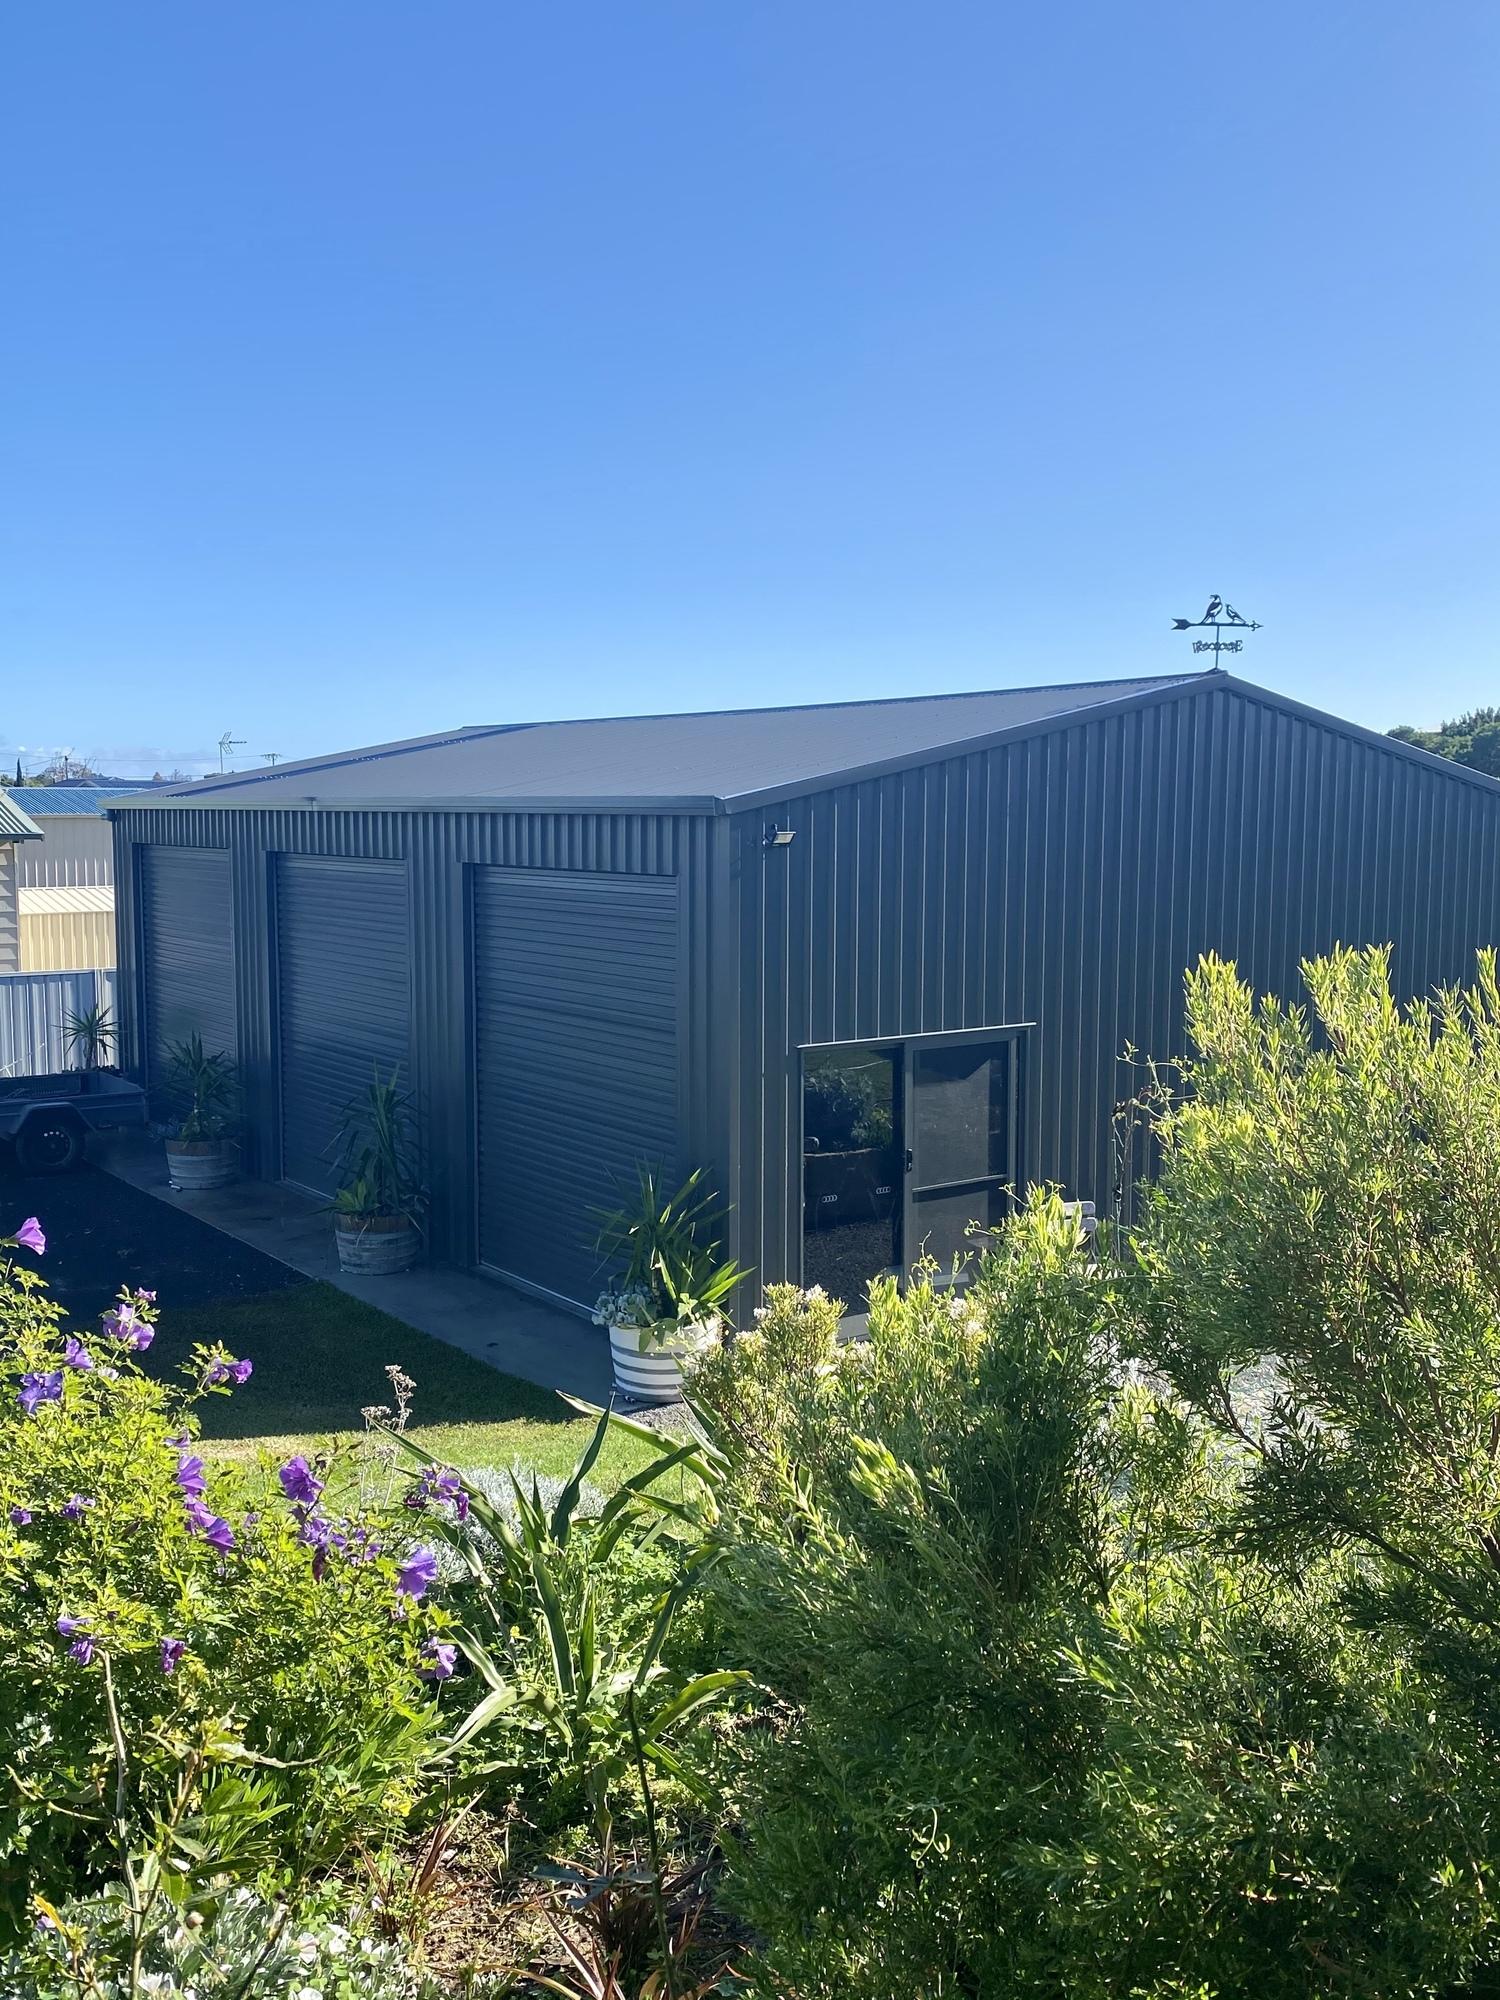 Erica from Robe, SA loves COLORBOND® steel. Roofing, Guttering & Fascia, Garage Doors, Walling, Fencing, Sheds made from COLORBOND® steel in colour Woodland Grey®